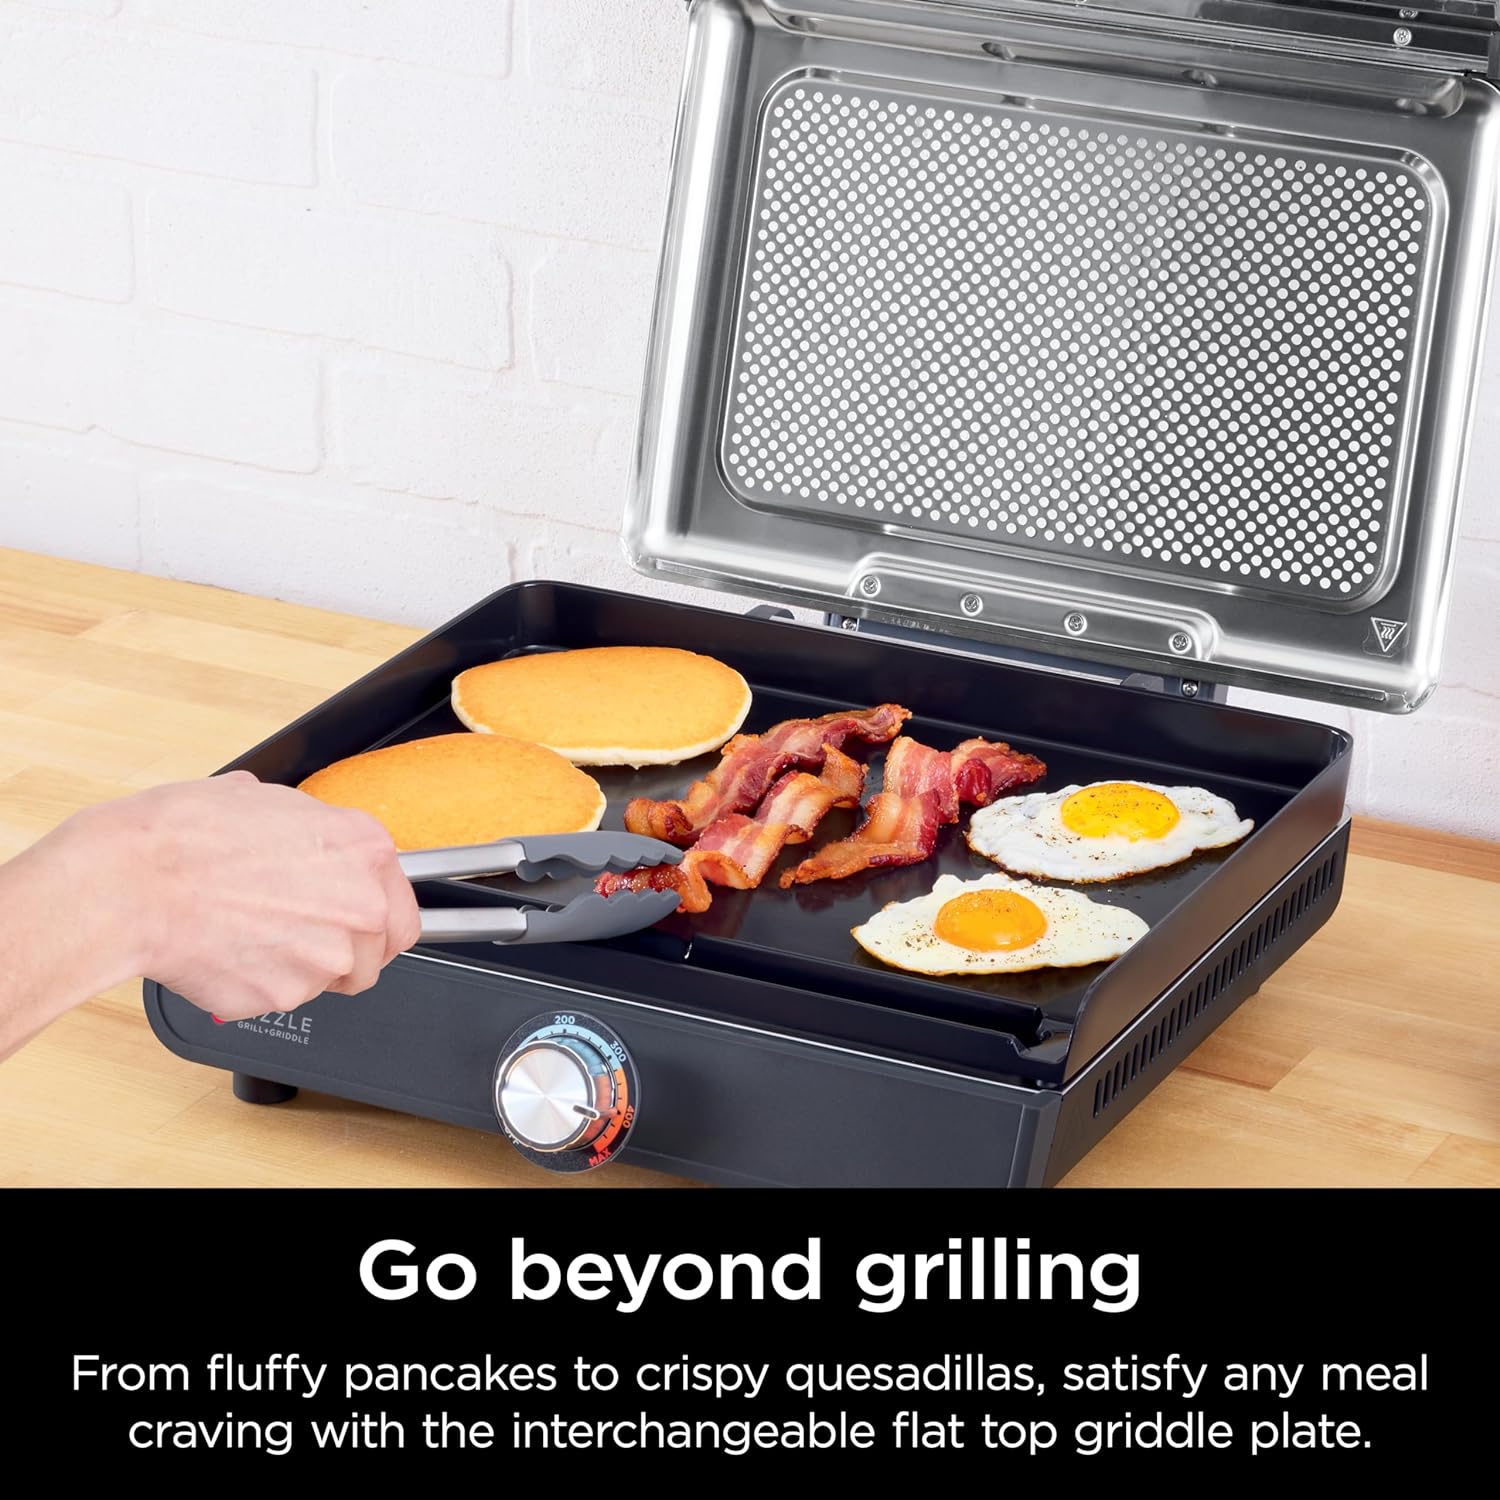 Ninja GR101 Sizzle Smokeless Indoor Grill  Griddle, 14 Interchangeable Nonstick Plates, Dishwasher-Safe Removable Mesh Lid, 500F Max Heat, Even Edge-to-Edge Cooking, Grey/Silver